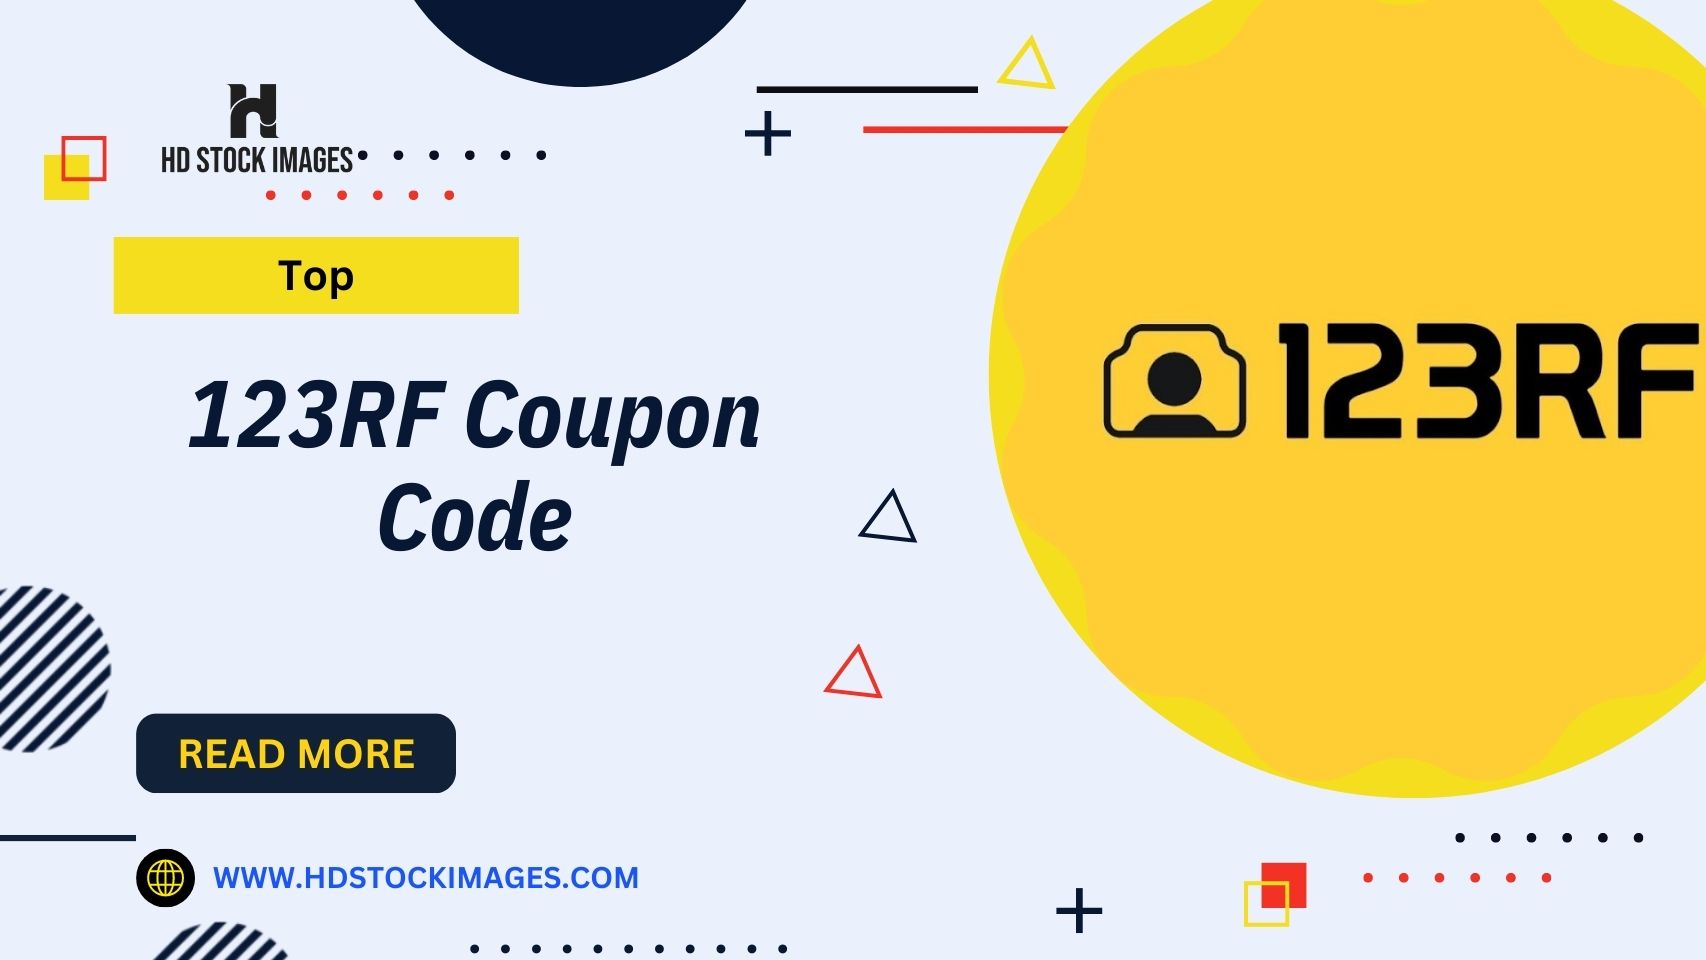 123RF Coupon Code: Discounts for Your Stock Image Purchases